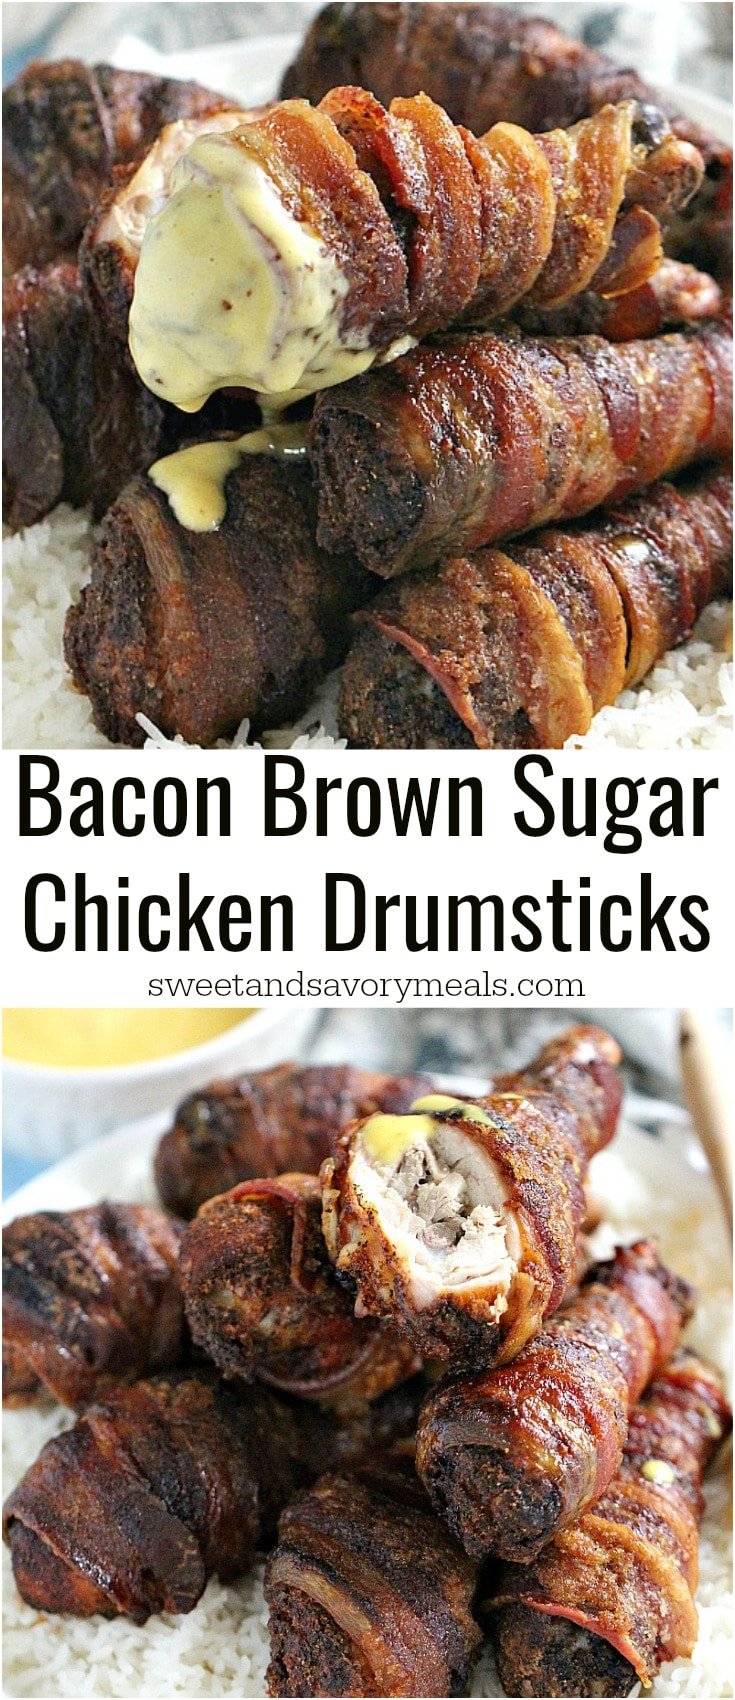 Spicy Brown Sugar Bacon Wrapped Chicken Drumsticks are sweet and spicy and full of flavor, crunchy on the outside and juicy on the inside.